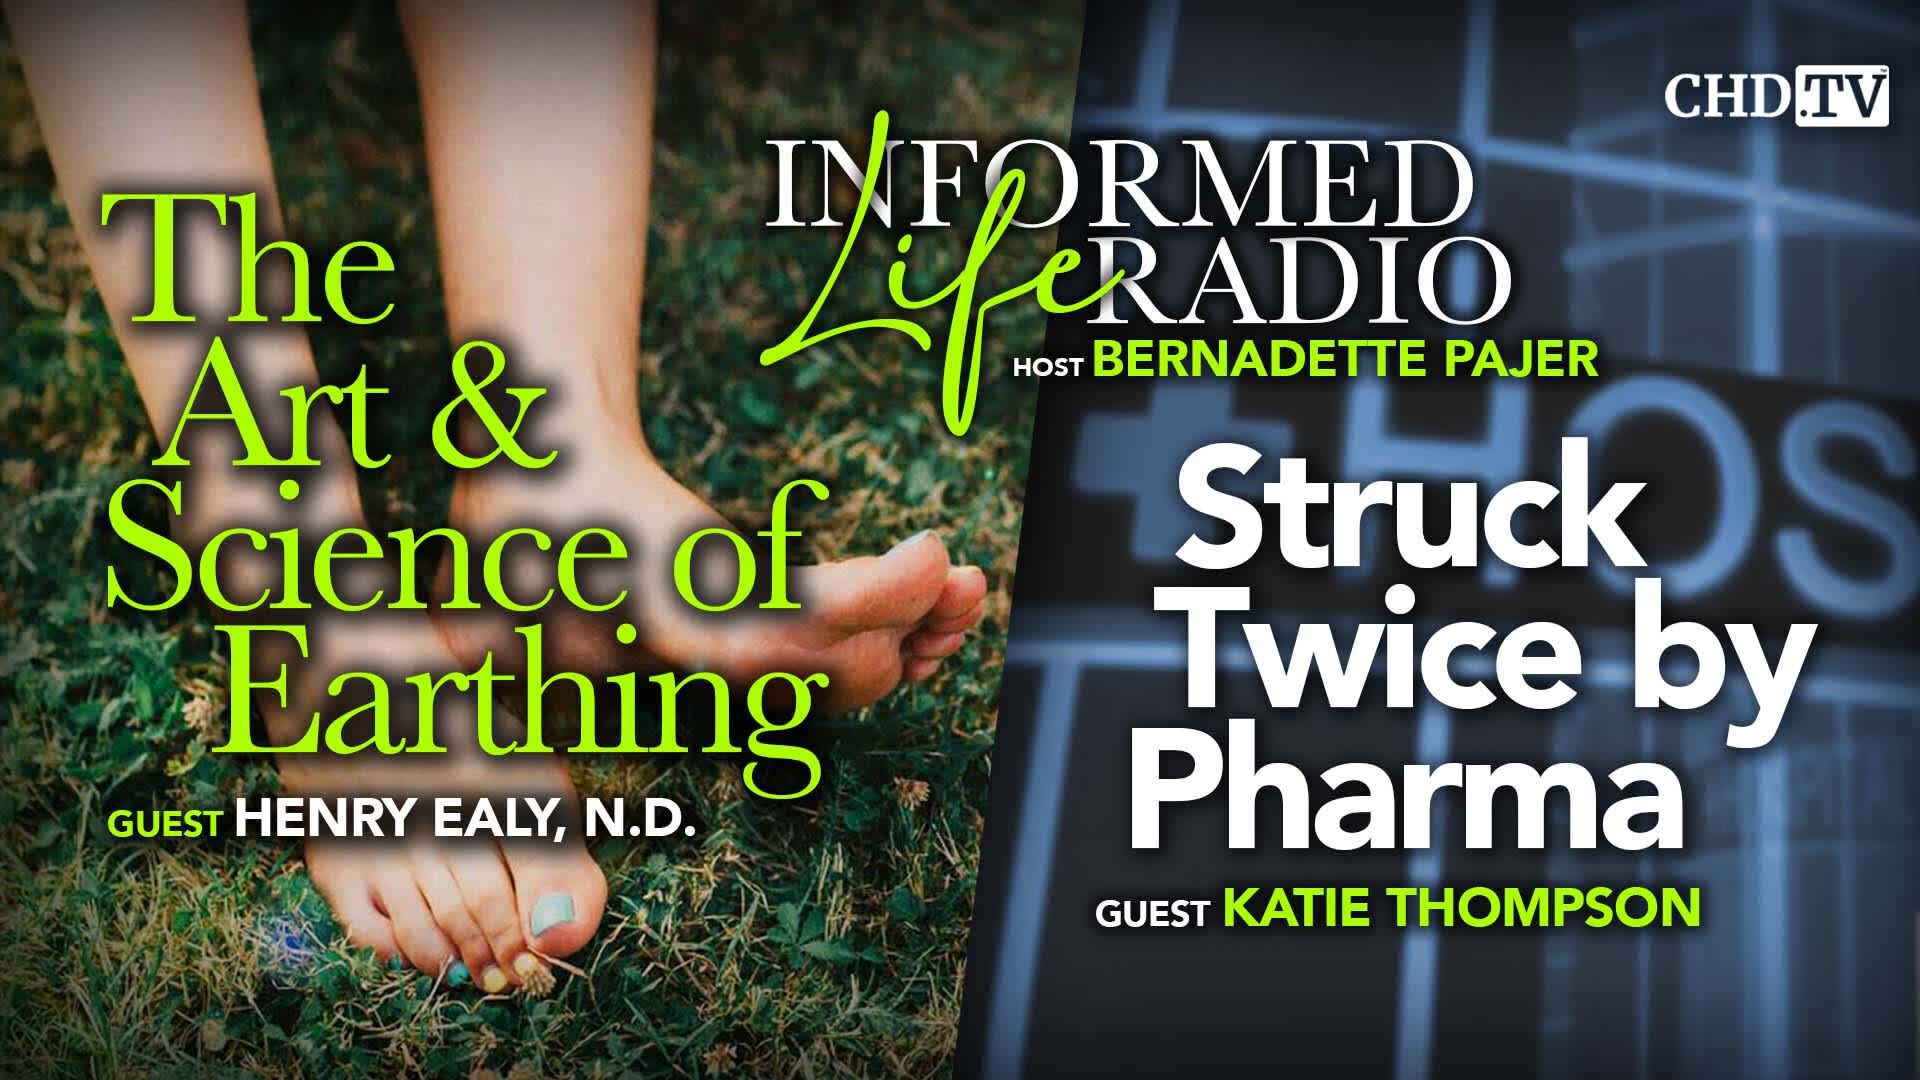 The Art & Science of Earthing + Struck Twice by Pharma